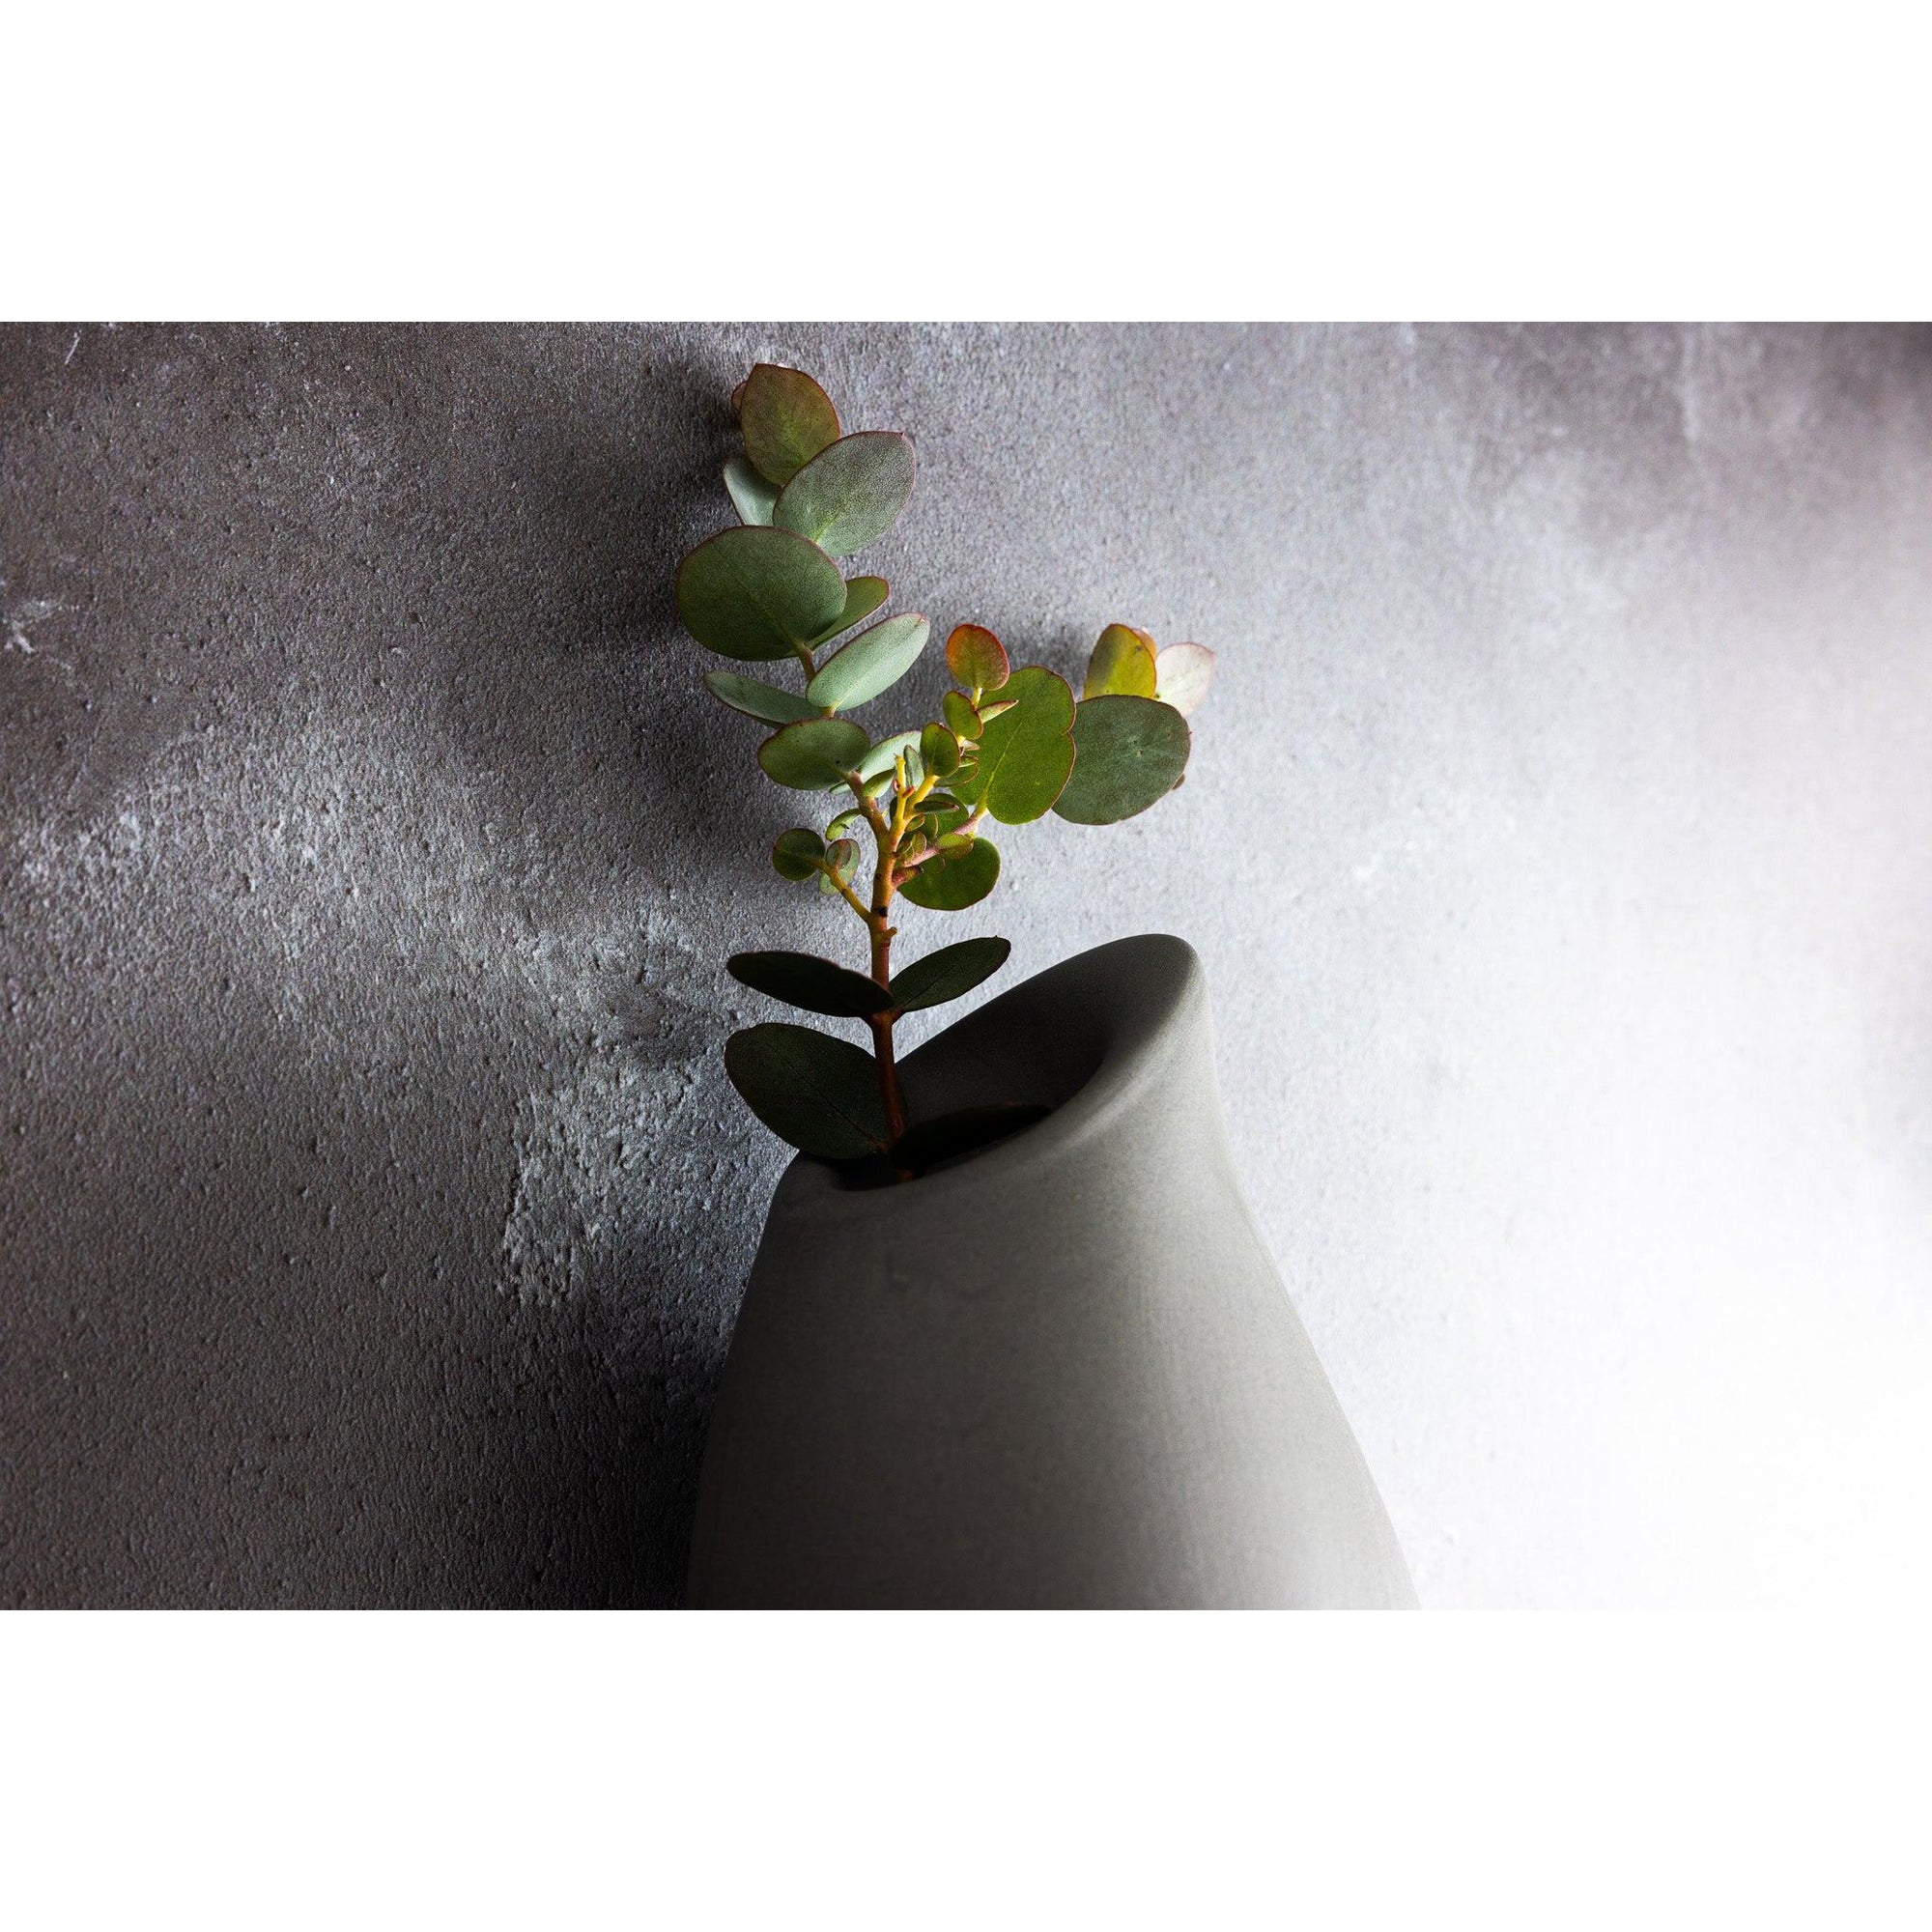 KSP2 Droplet Wall Vase by Kate Schuricht, available at Padstow Gallery, Cornwall